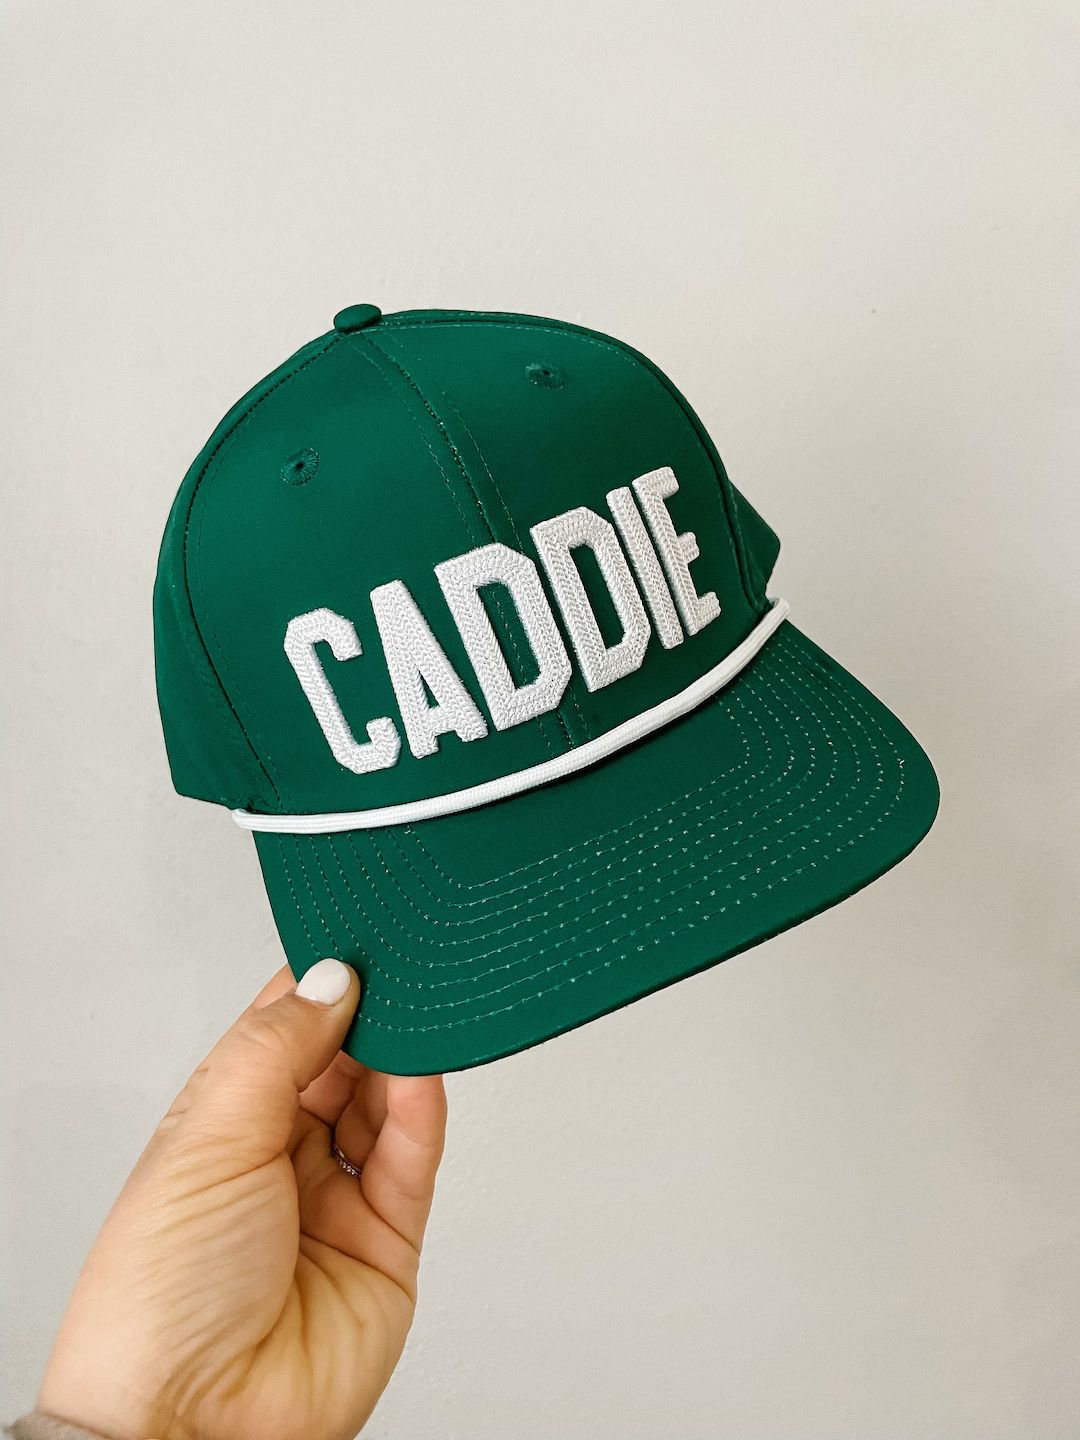 Caddie Uniform HAT That Says caddie in Adult and Youth Sizes Tiger Woods Pga Tour Birthday Hallow... | Etsy (US)